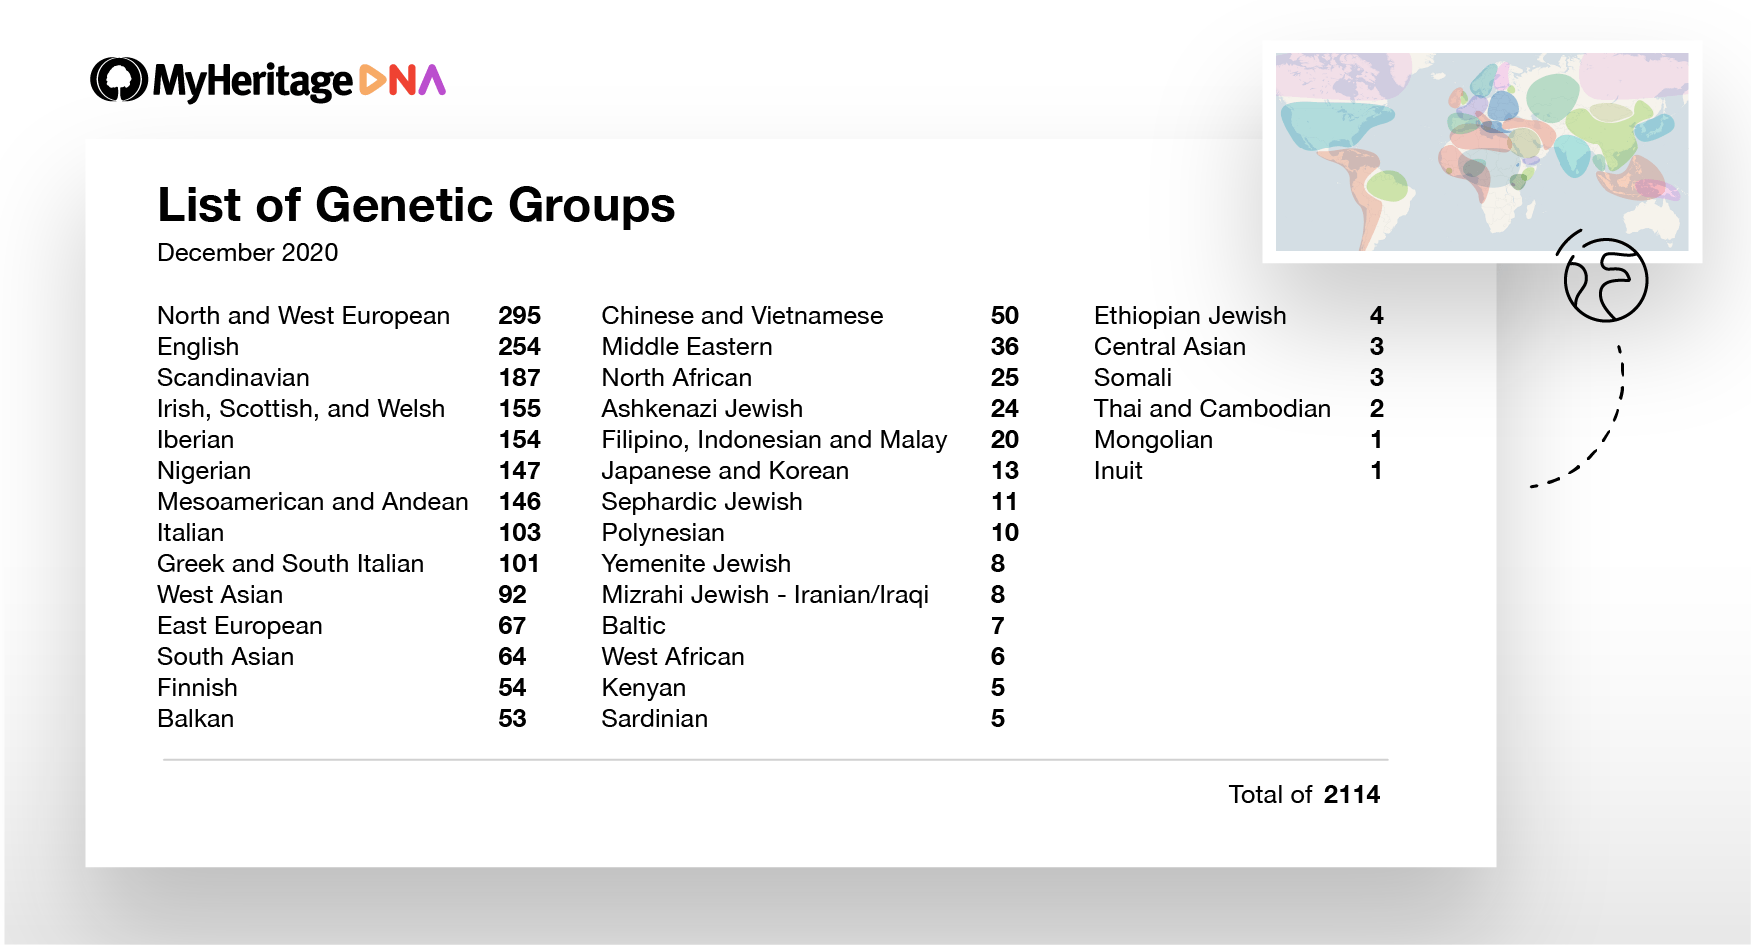 List of the number of Genetic Groups available today, beneath their main top-level ethnicities. For example, there are 103 Genetic Groups that are predominantly Italian and 54 Genetic Groups that are Finnish (click to zoom)